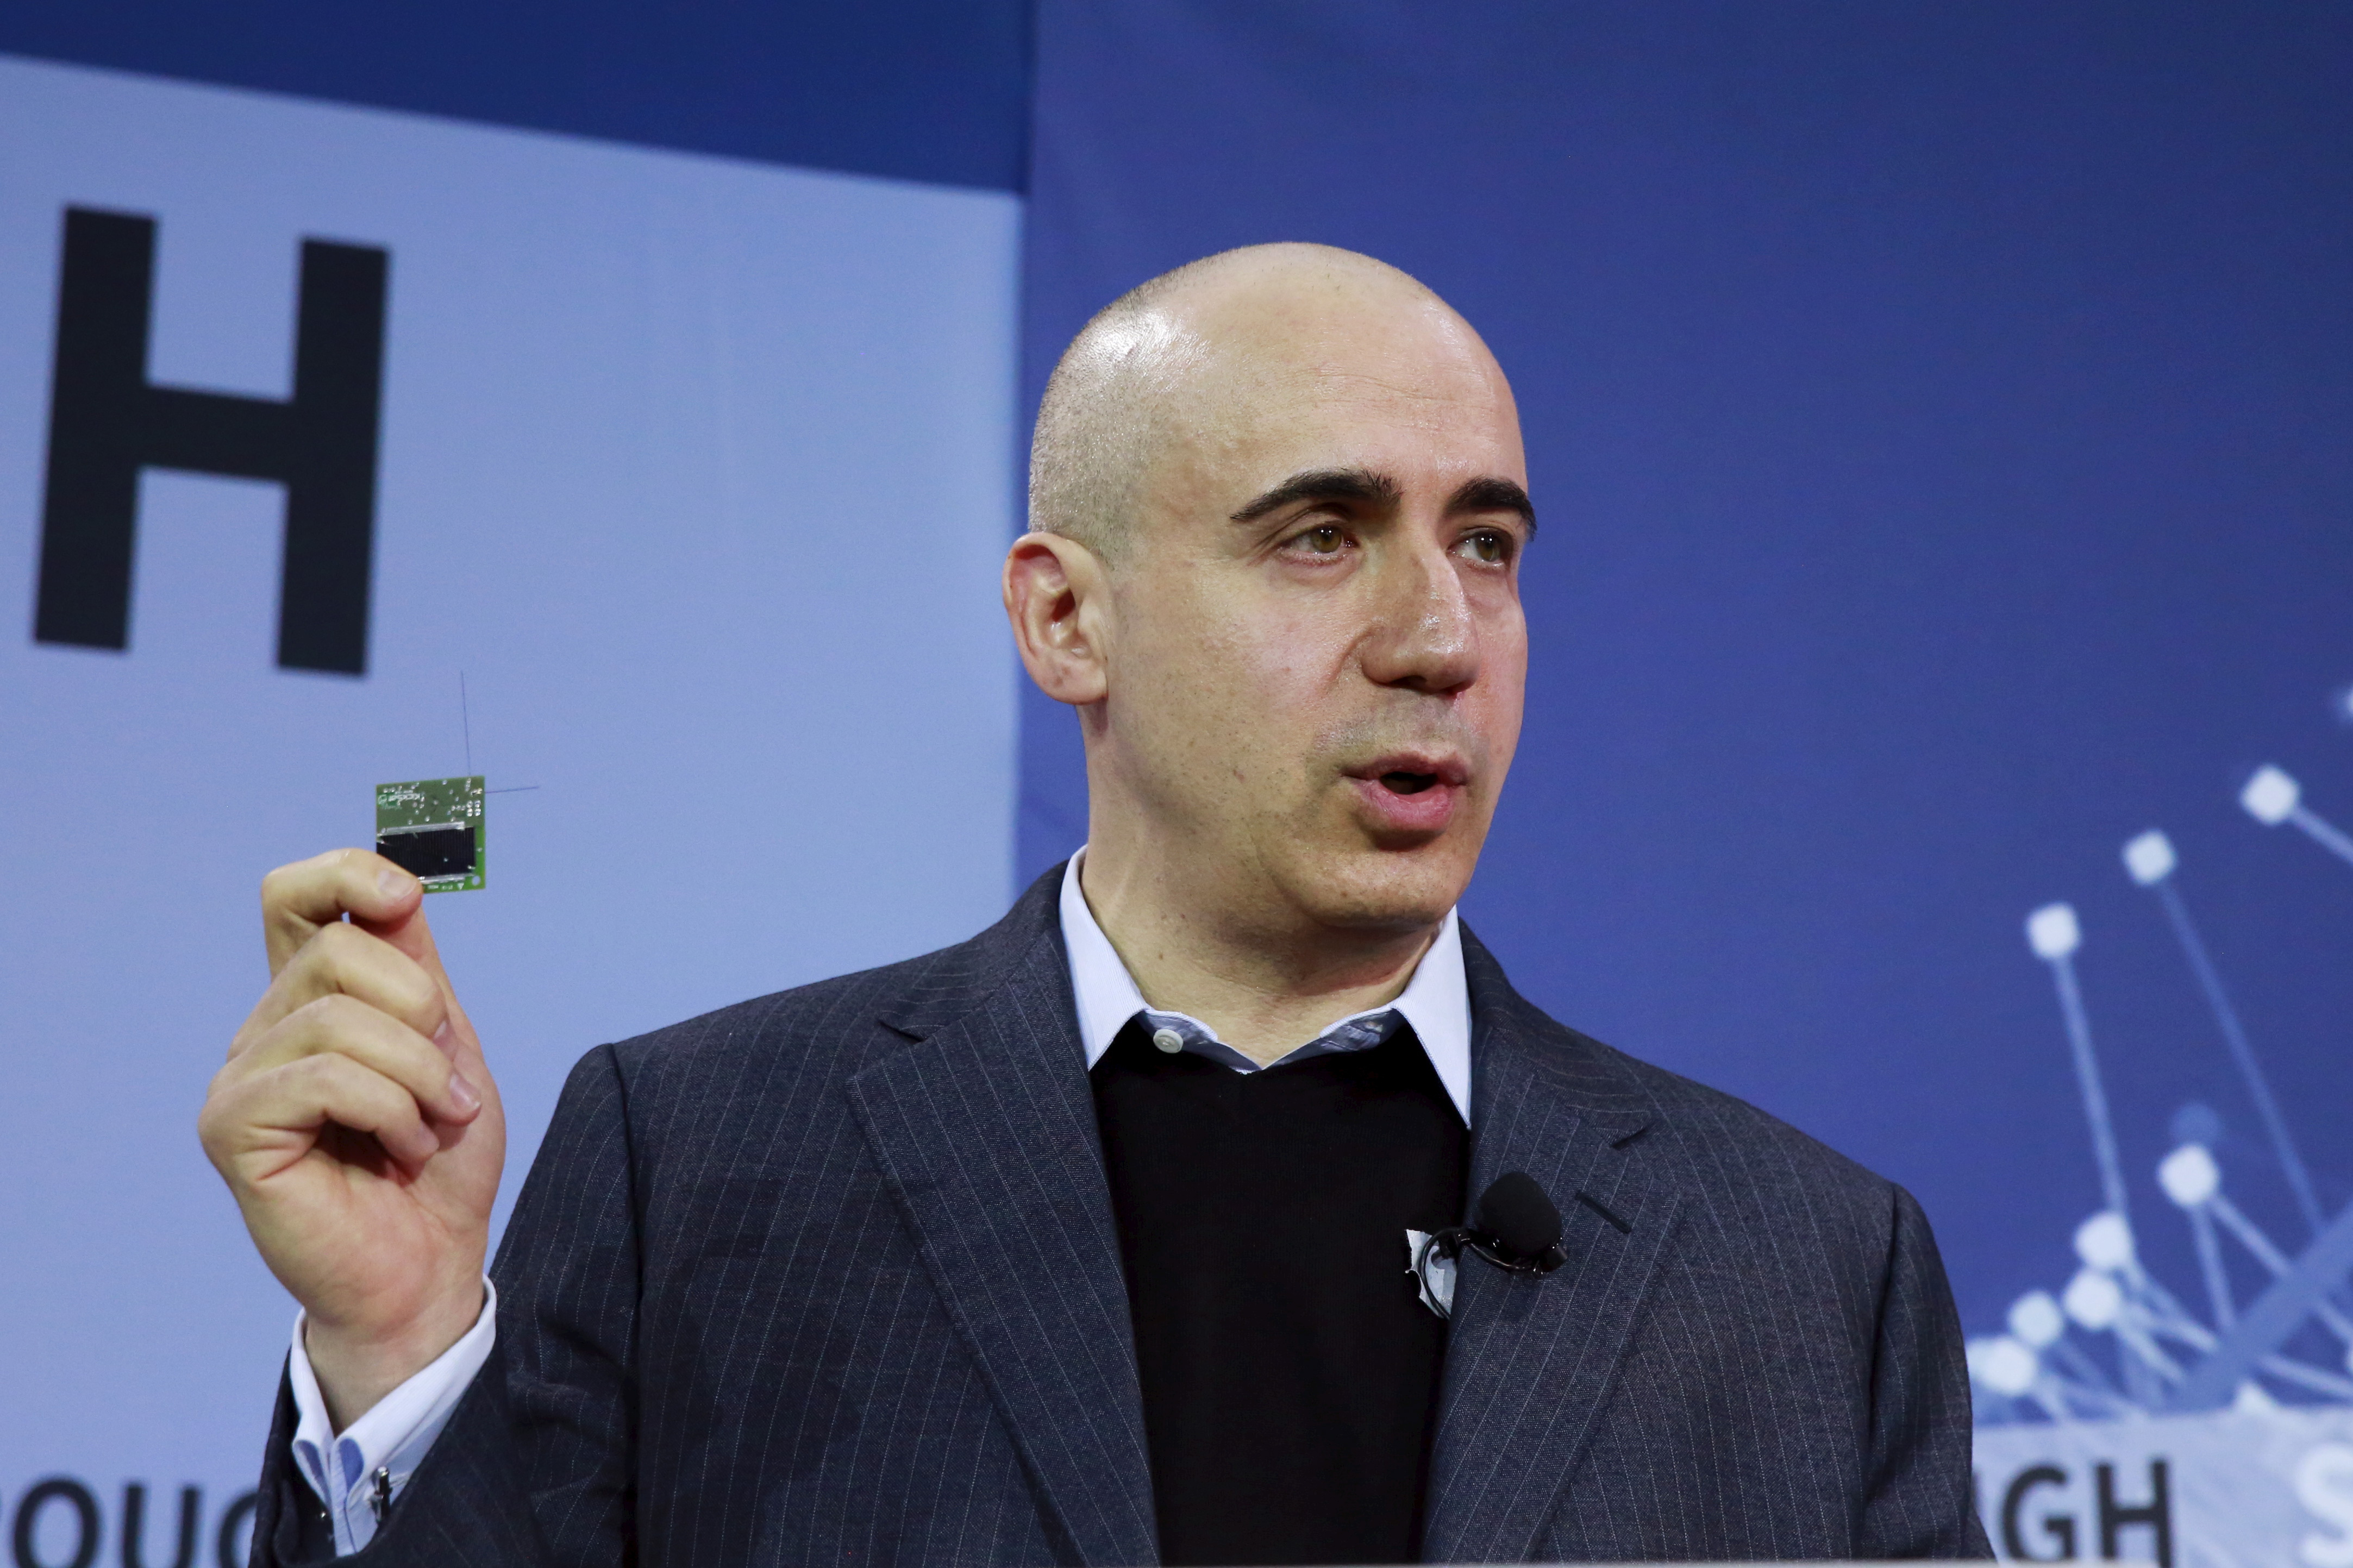 Investor Yuri Milner holds a small chip during an announcement of the Breakthrough Starshot initiative in New York